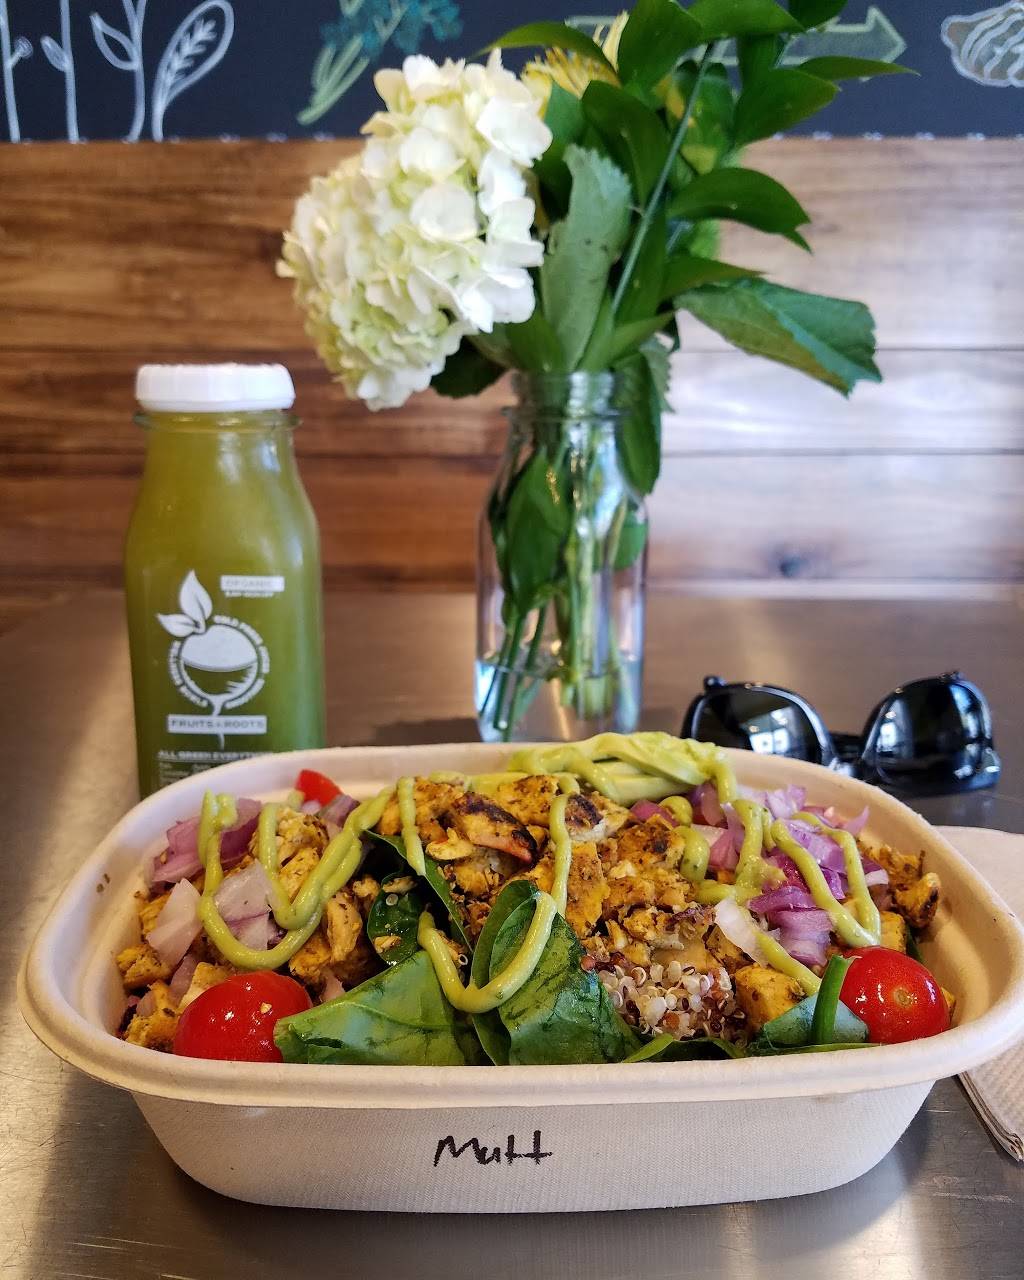 Fruits & Roots Cold Pressed Juice Bar and Wellness Kitchen | 7885 W Sunset Rd #180, Las Vegas, NV 89113, USA | Phone: (702) 202-0922